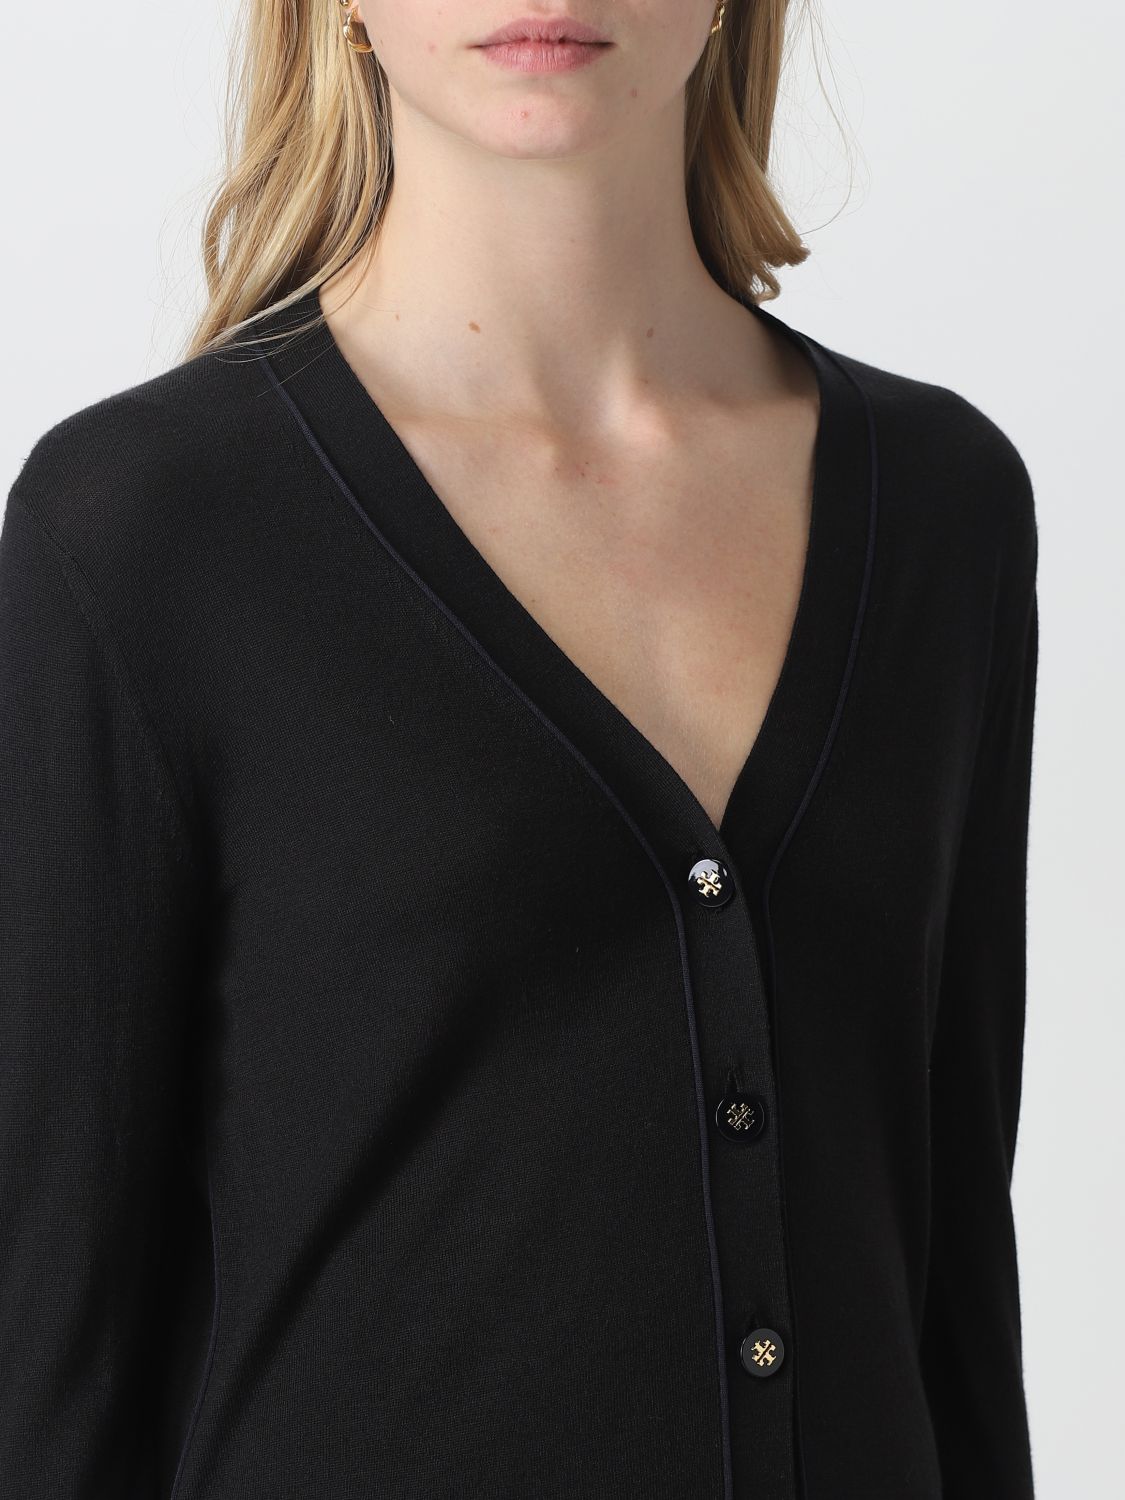 TORY BURCH: sweater for woman - Black | Tory Burch sweater 146283 online on  